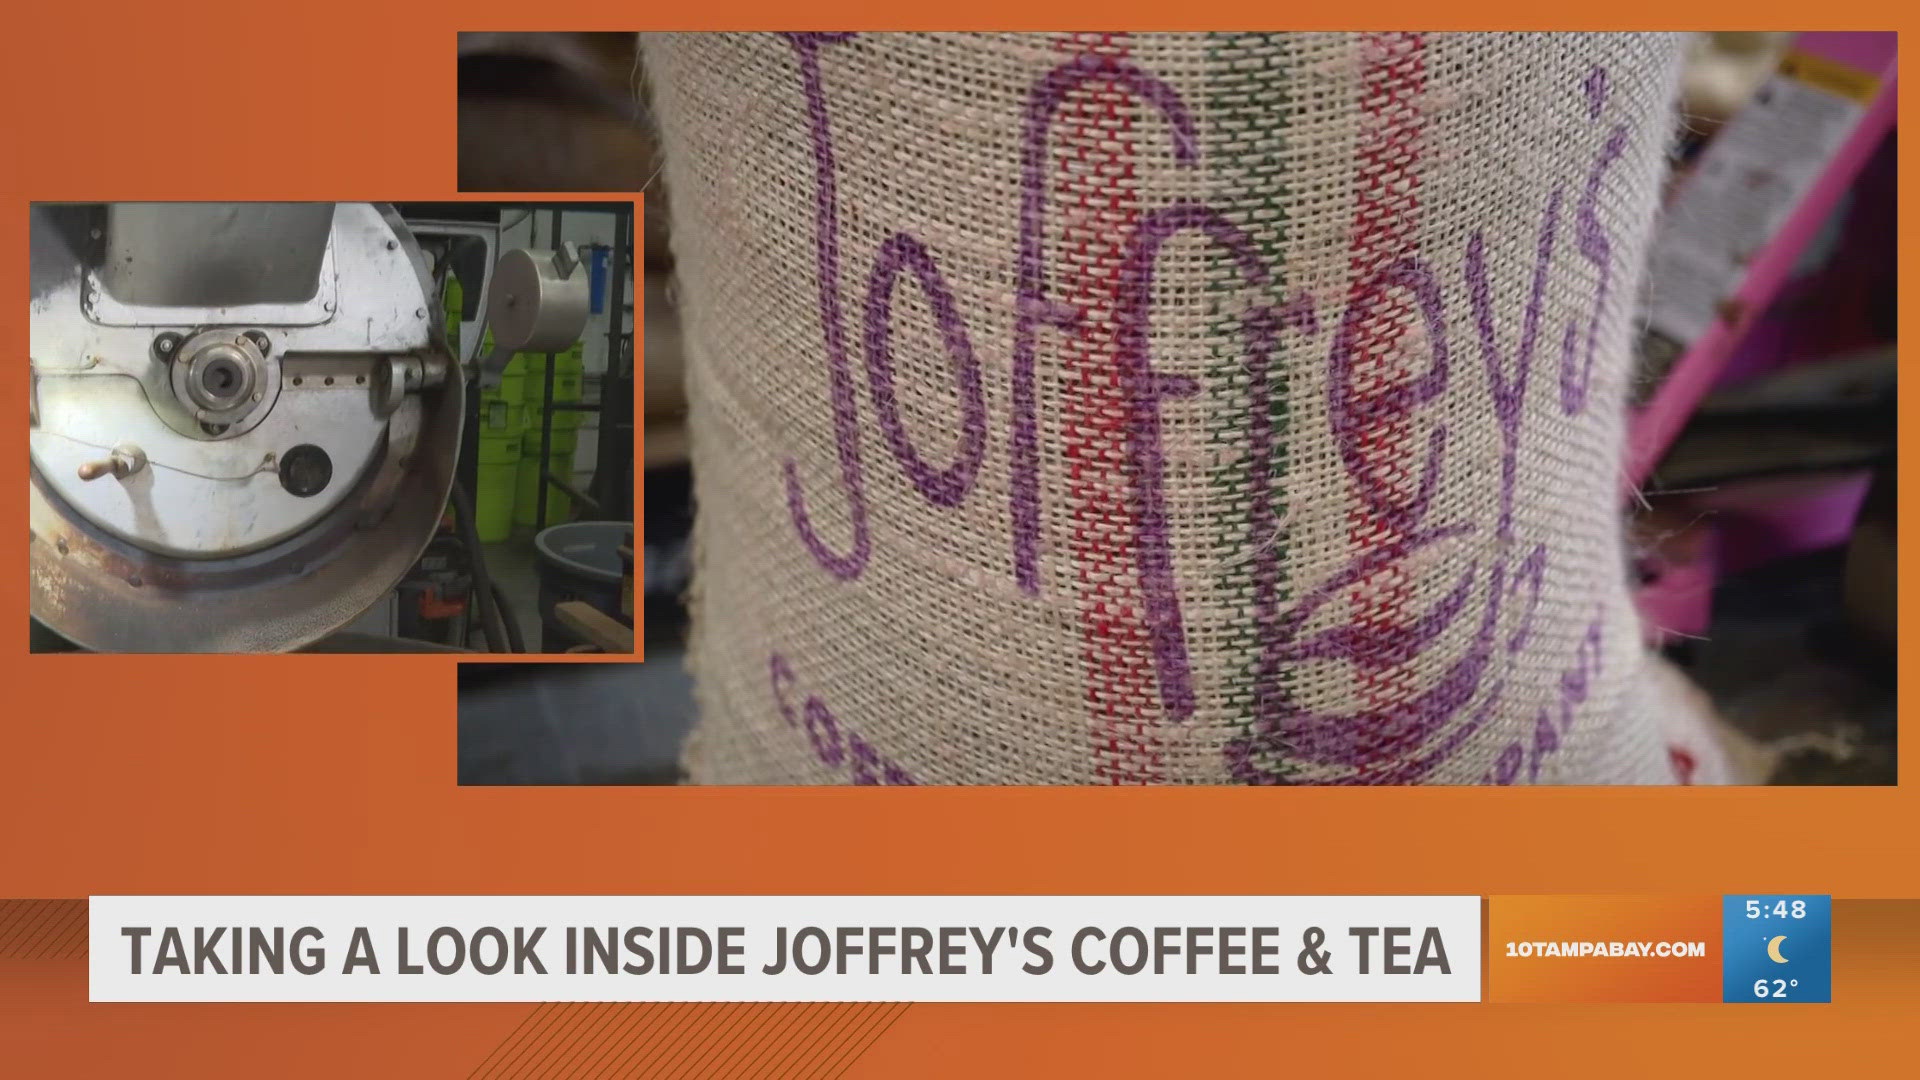 Joffrey's Coffee and Tea is headquartered in East Tampa, and they are the official coffee supplier of Disney World.